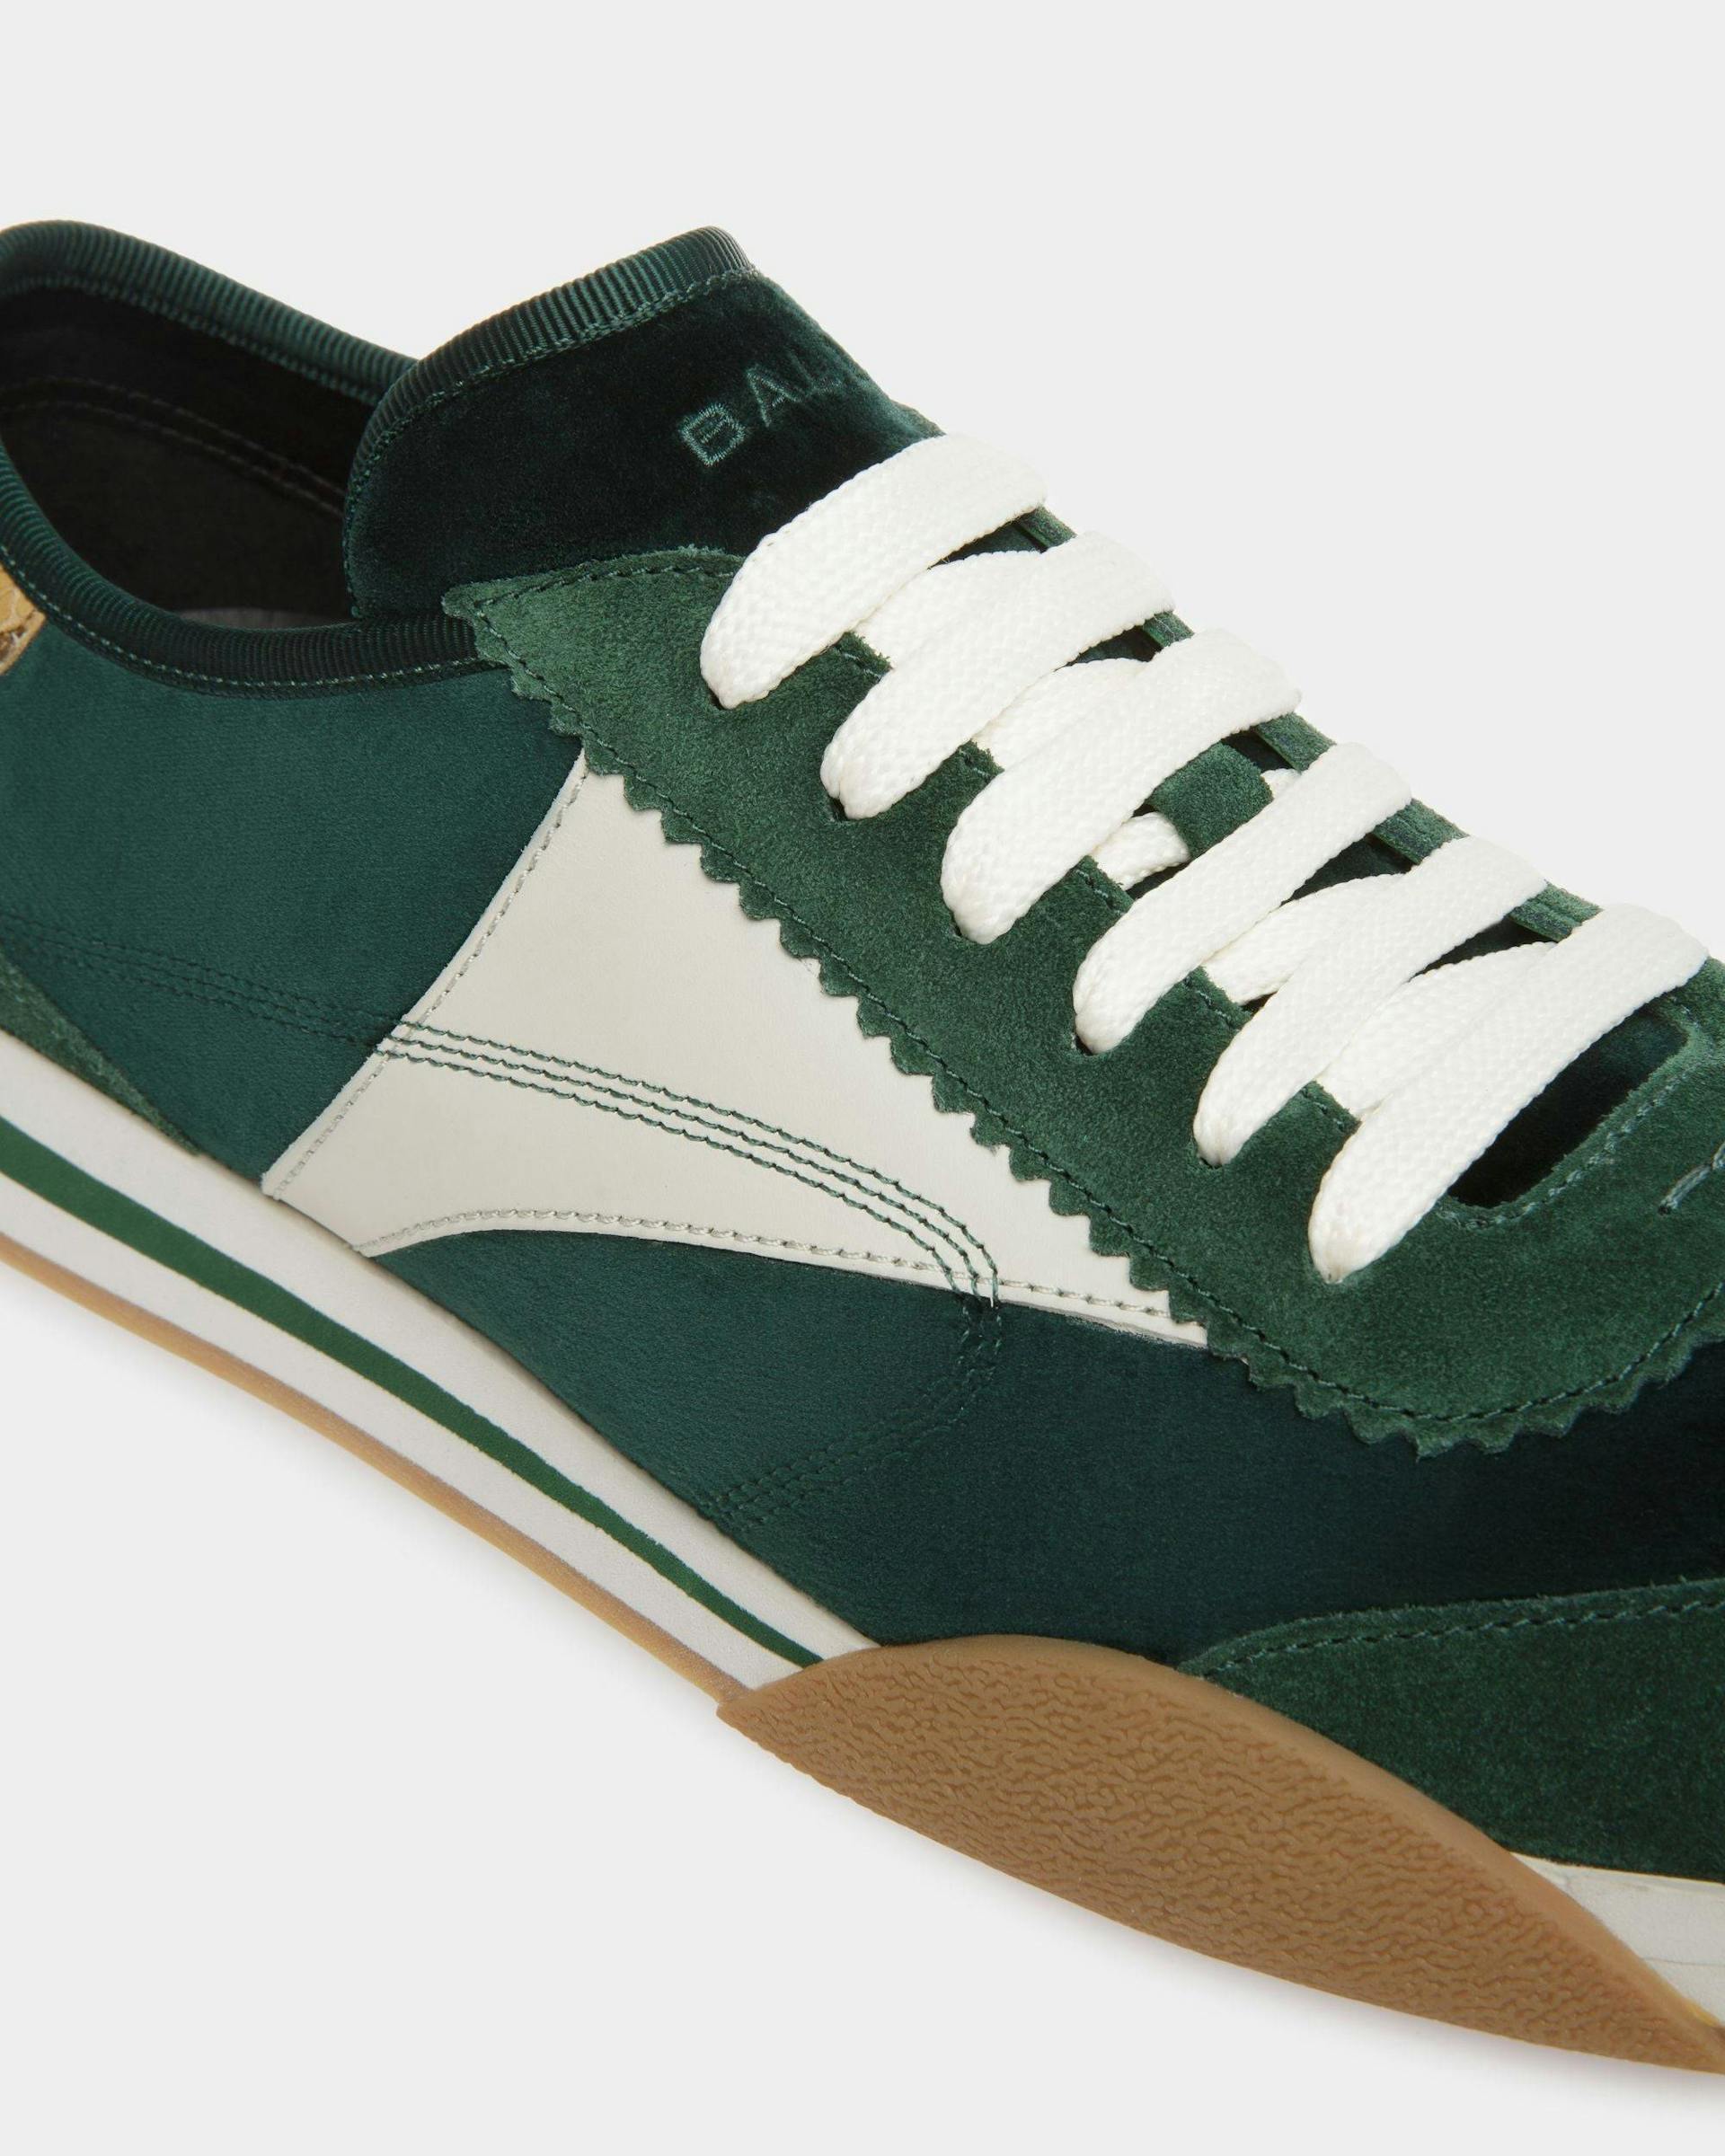 Sussex Sneakers In Green And Dusty White Leather And Cotton - Men's - Bally - 06